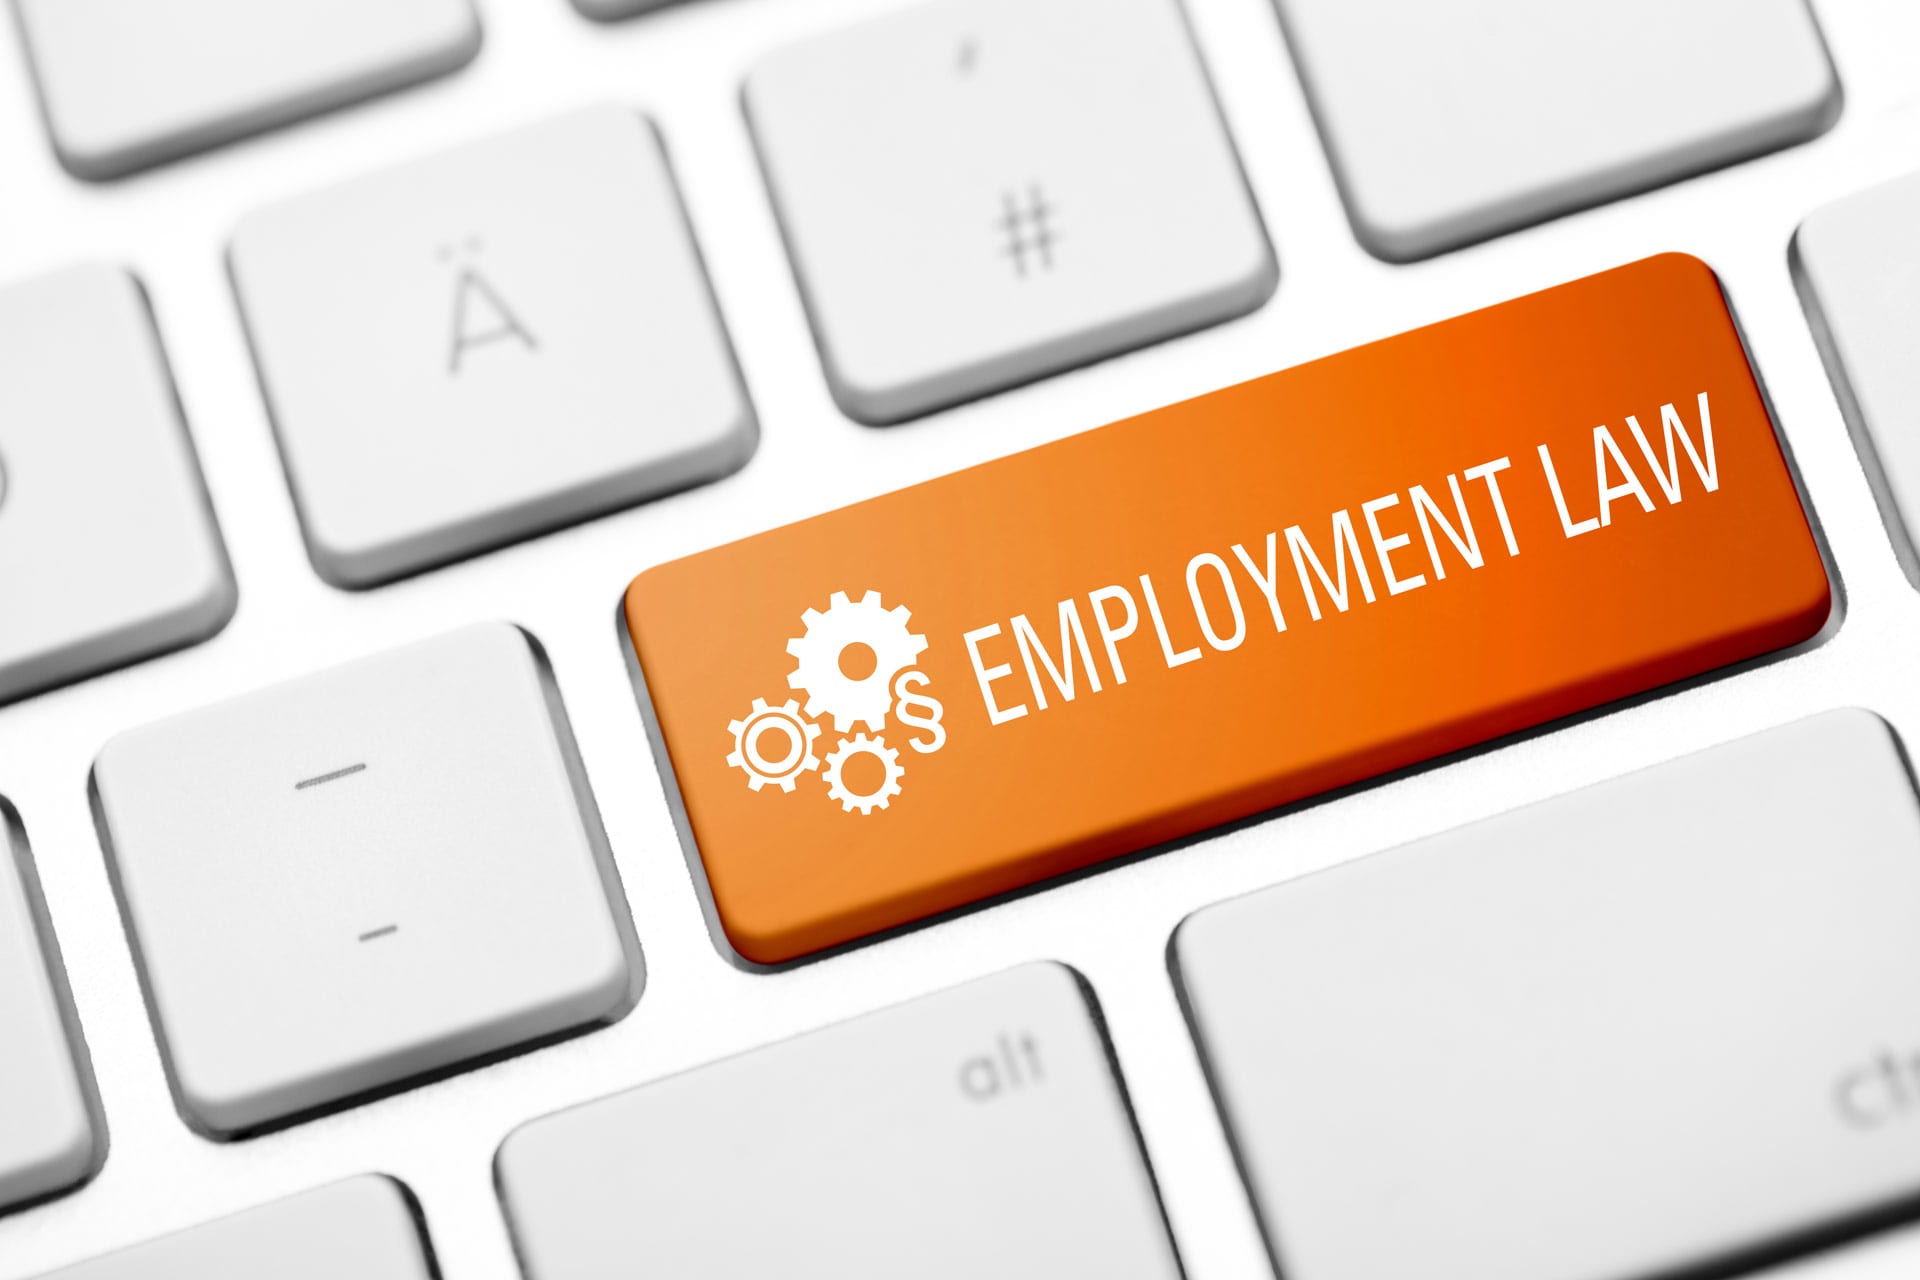 A Summary of recent Employment Law change